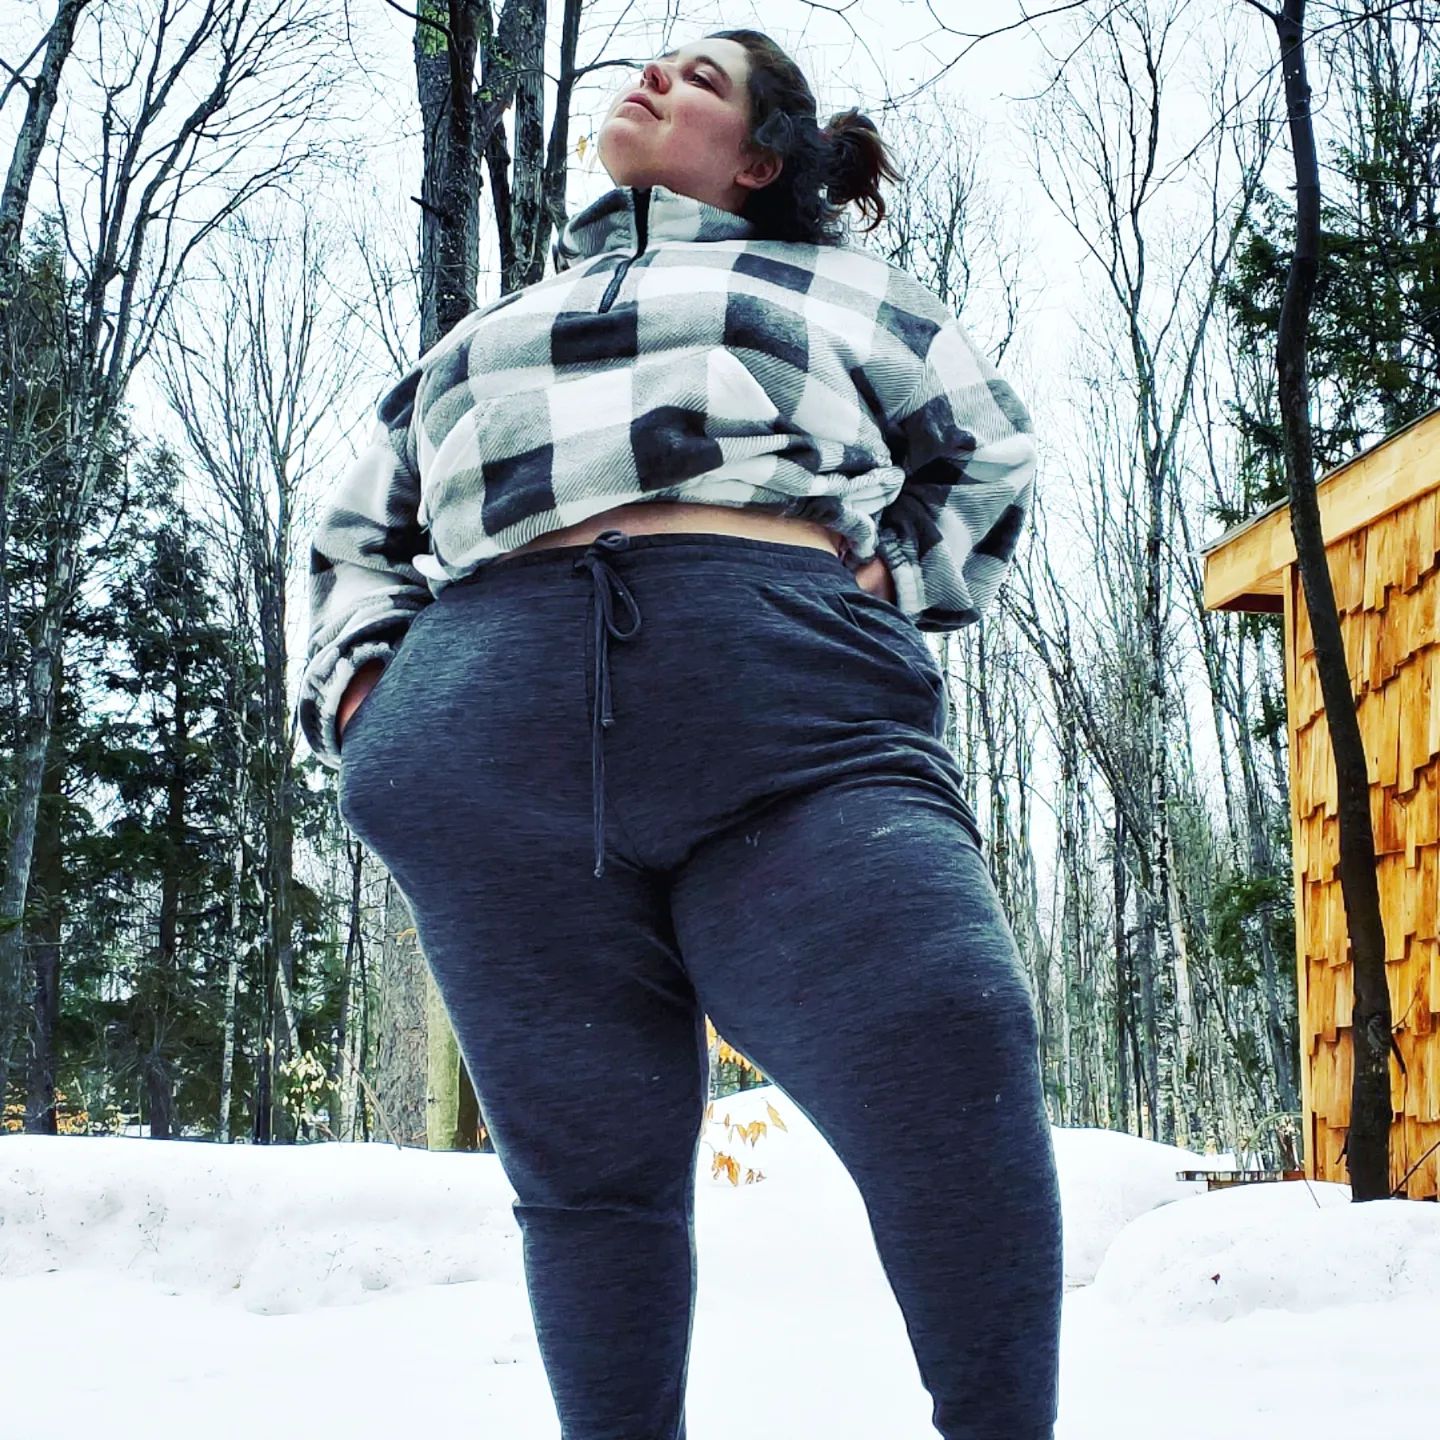 Some last minute winter fun, come see more on my other platforms 😋#bbw #thick #belly #bbwonlyfans #thiccthighs #booty